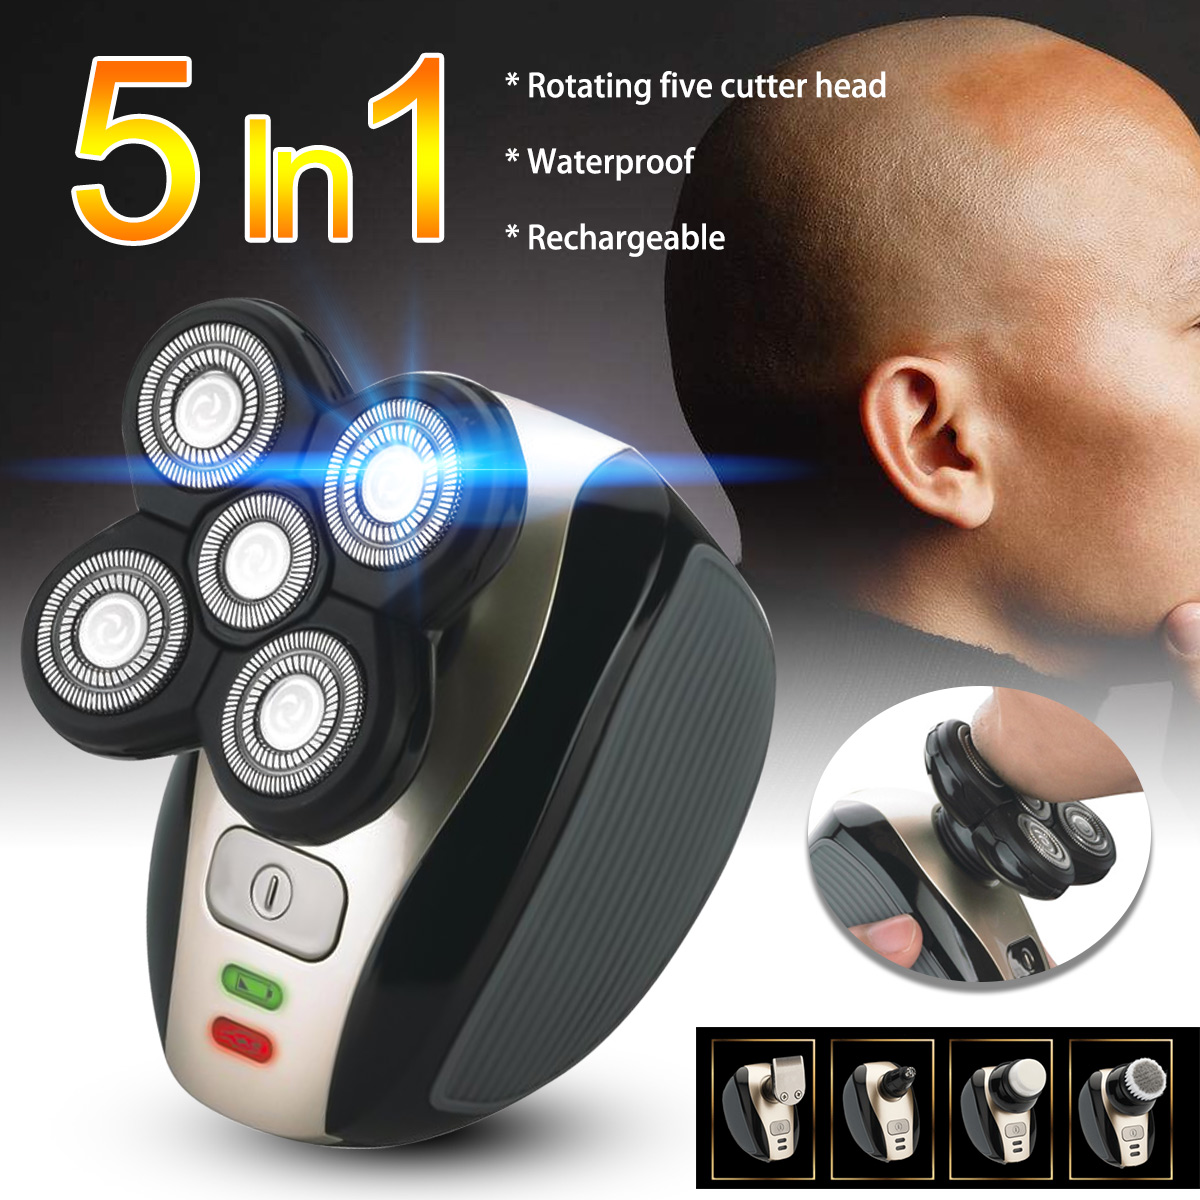 5-In-1-4D-Cordless-Hair-Clipper-Rechargeable-Bald-Head-Shaver-Razor-Trimmer-Groomer-1407007